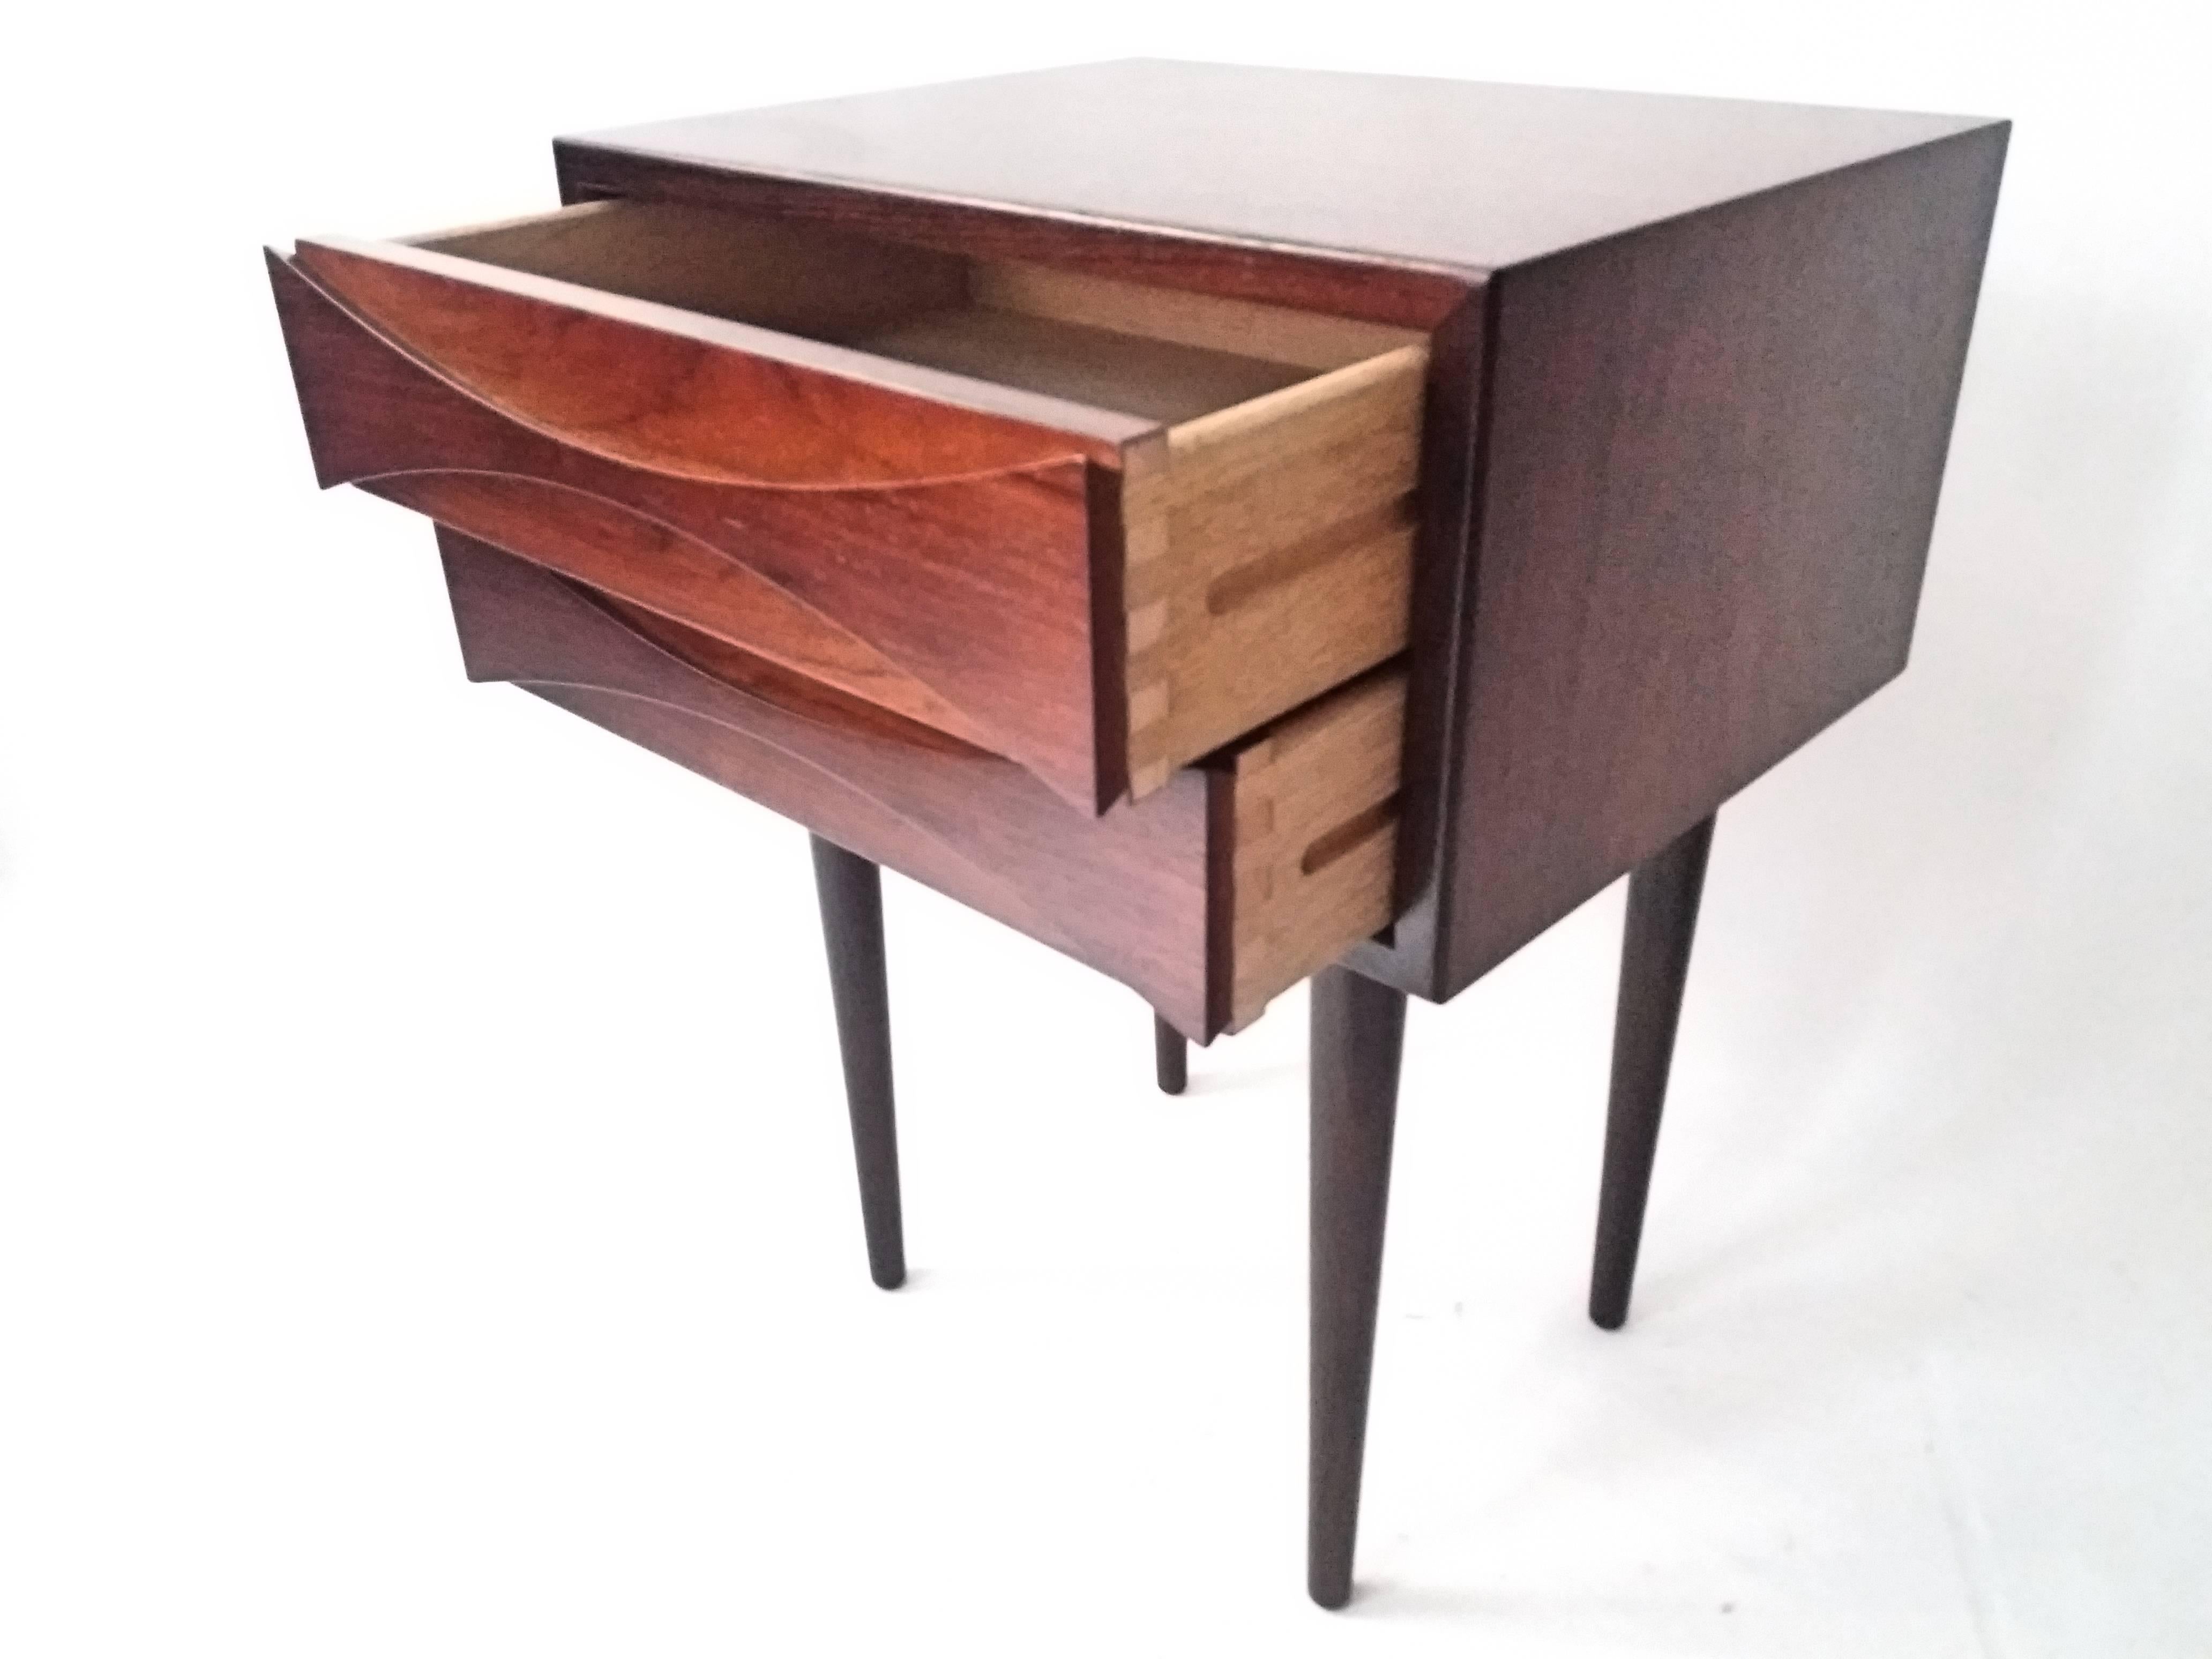 20th Century Pair of Tall Rosewood Nightstands by Arne Vodder